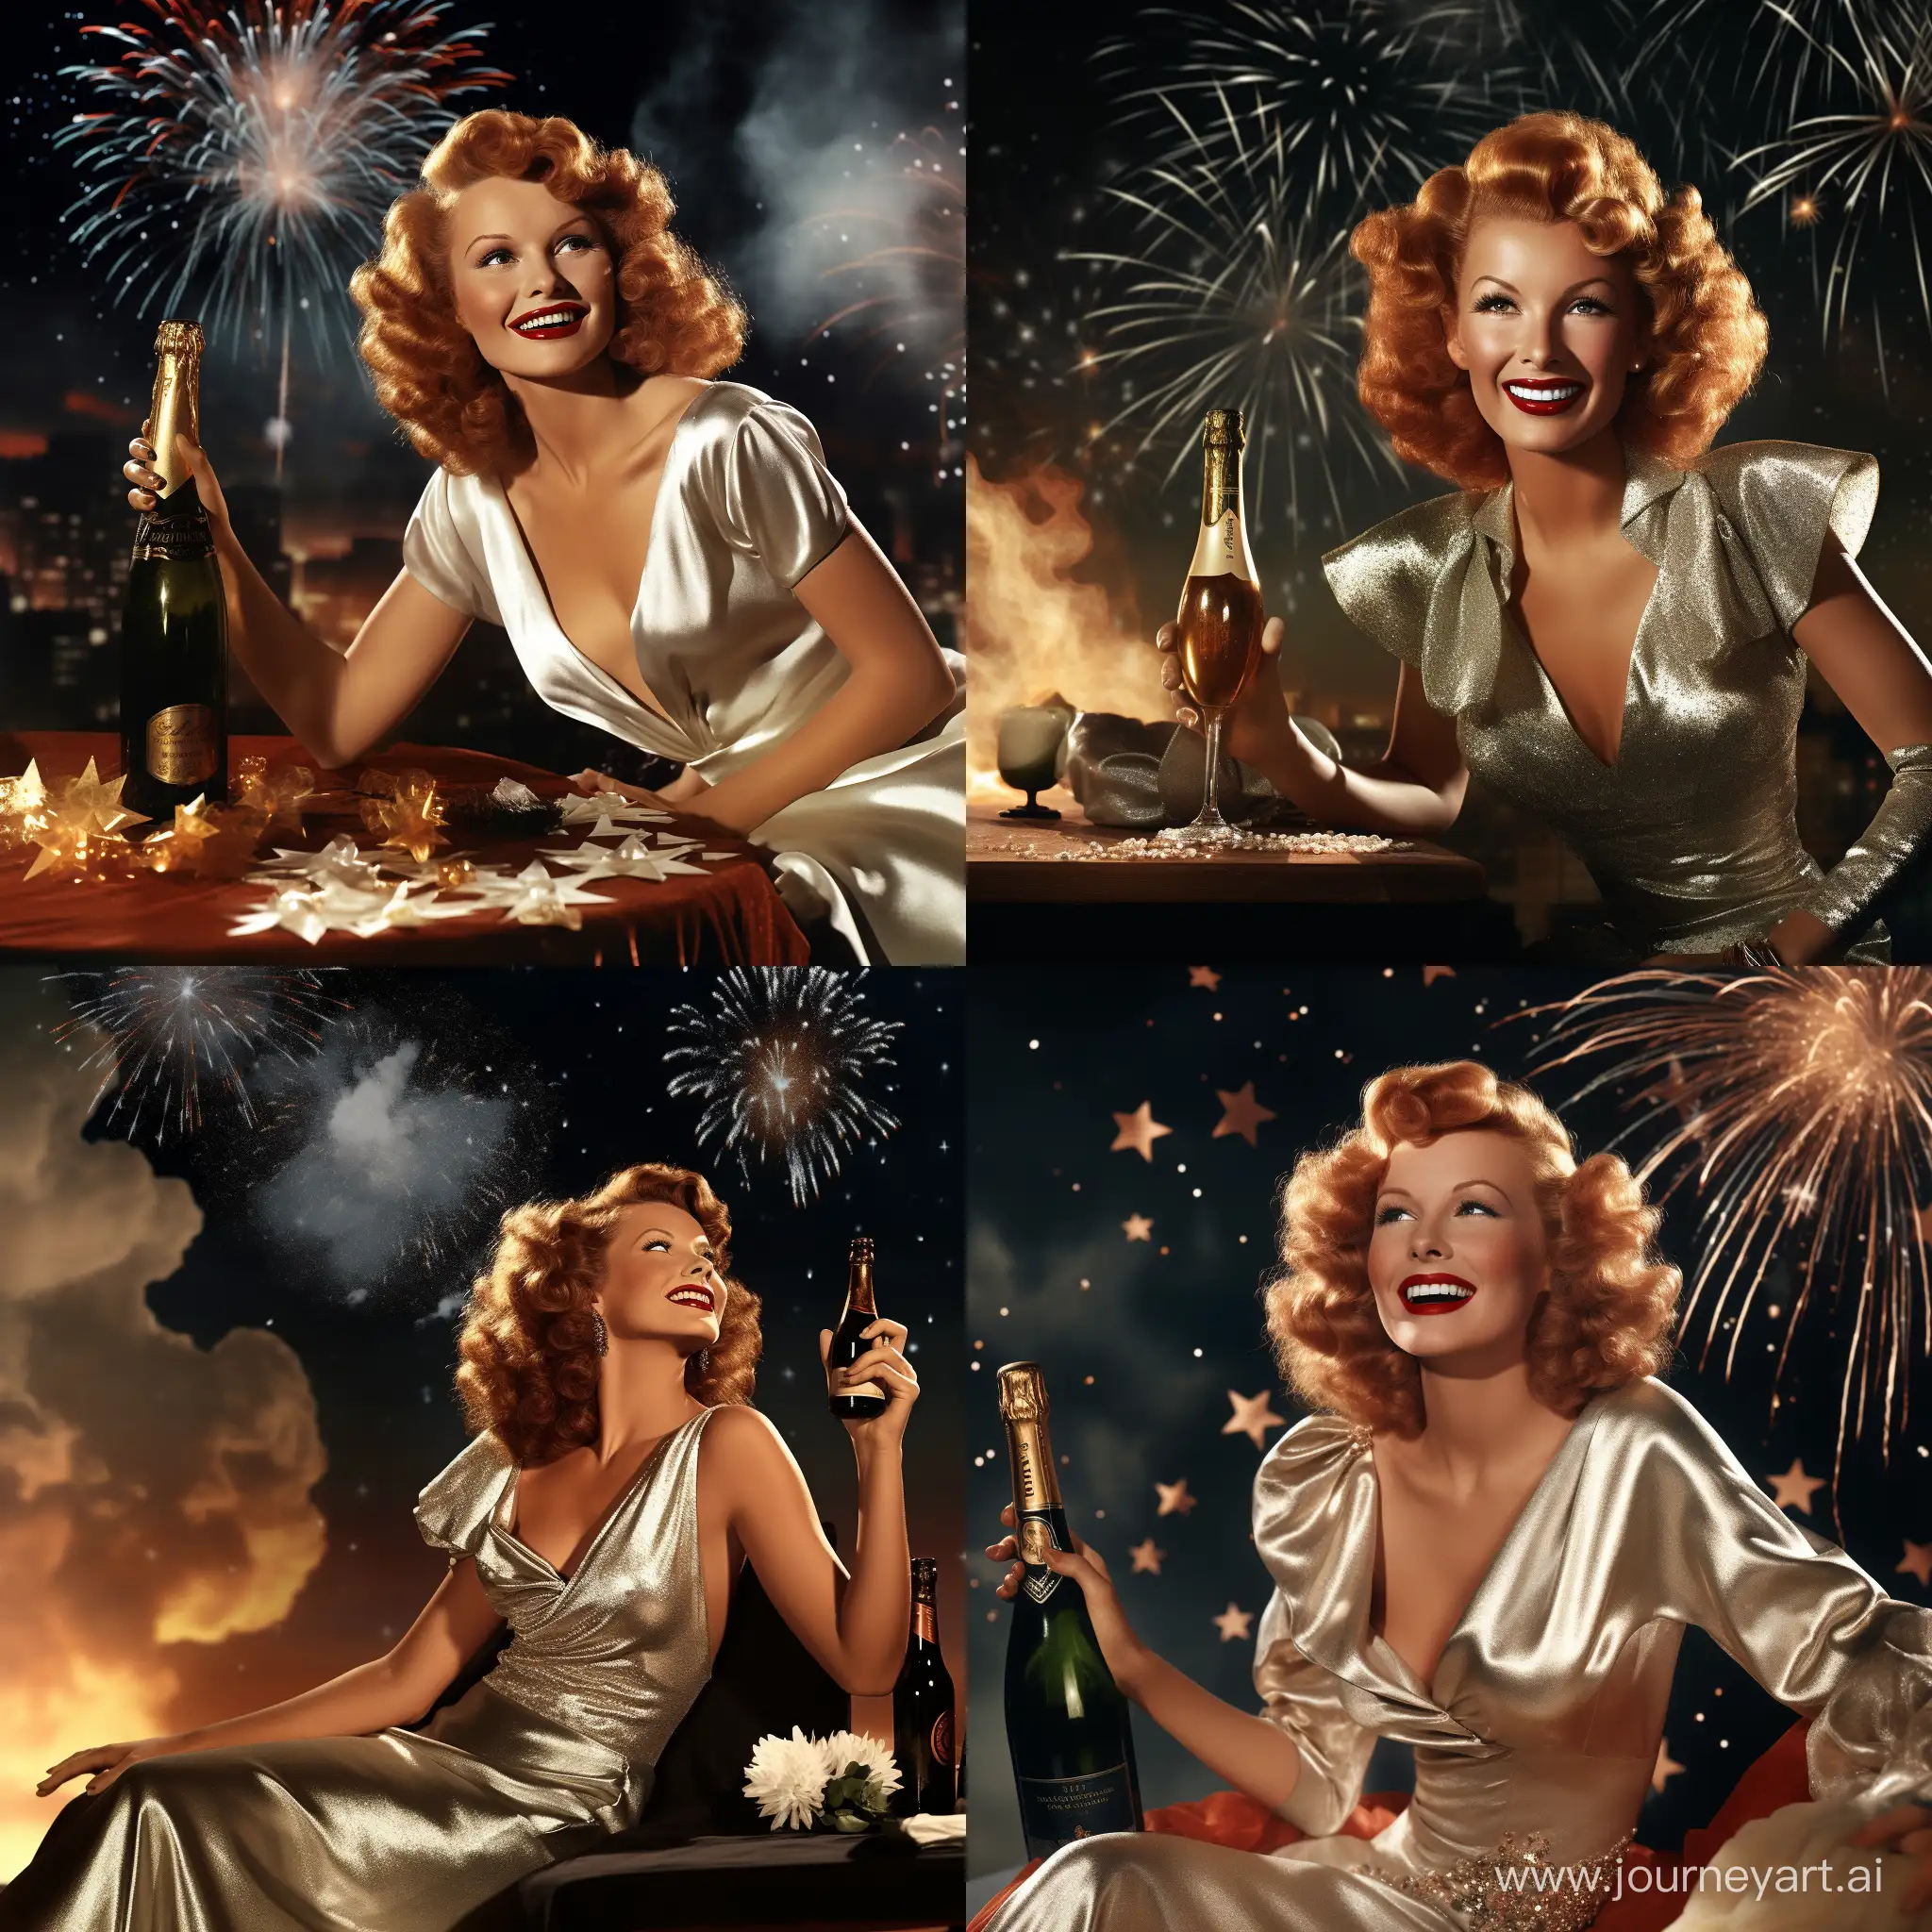 Rita Hayworth with end of year outfit, champagne, fireworks, indie, retro, happy, real, photorealistic, smile, parte background, Sky, People background